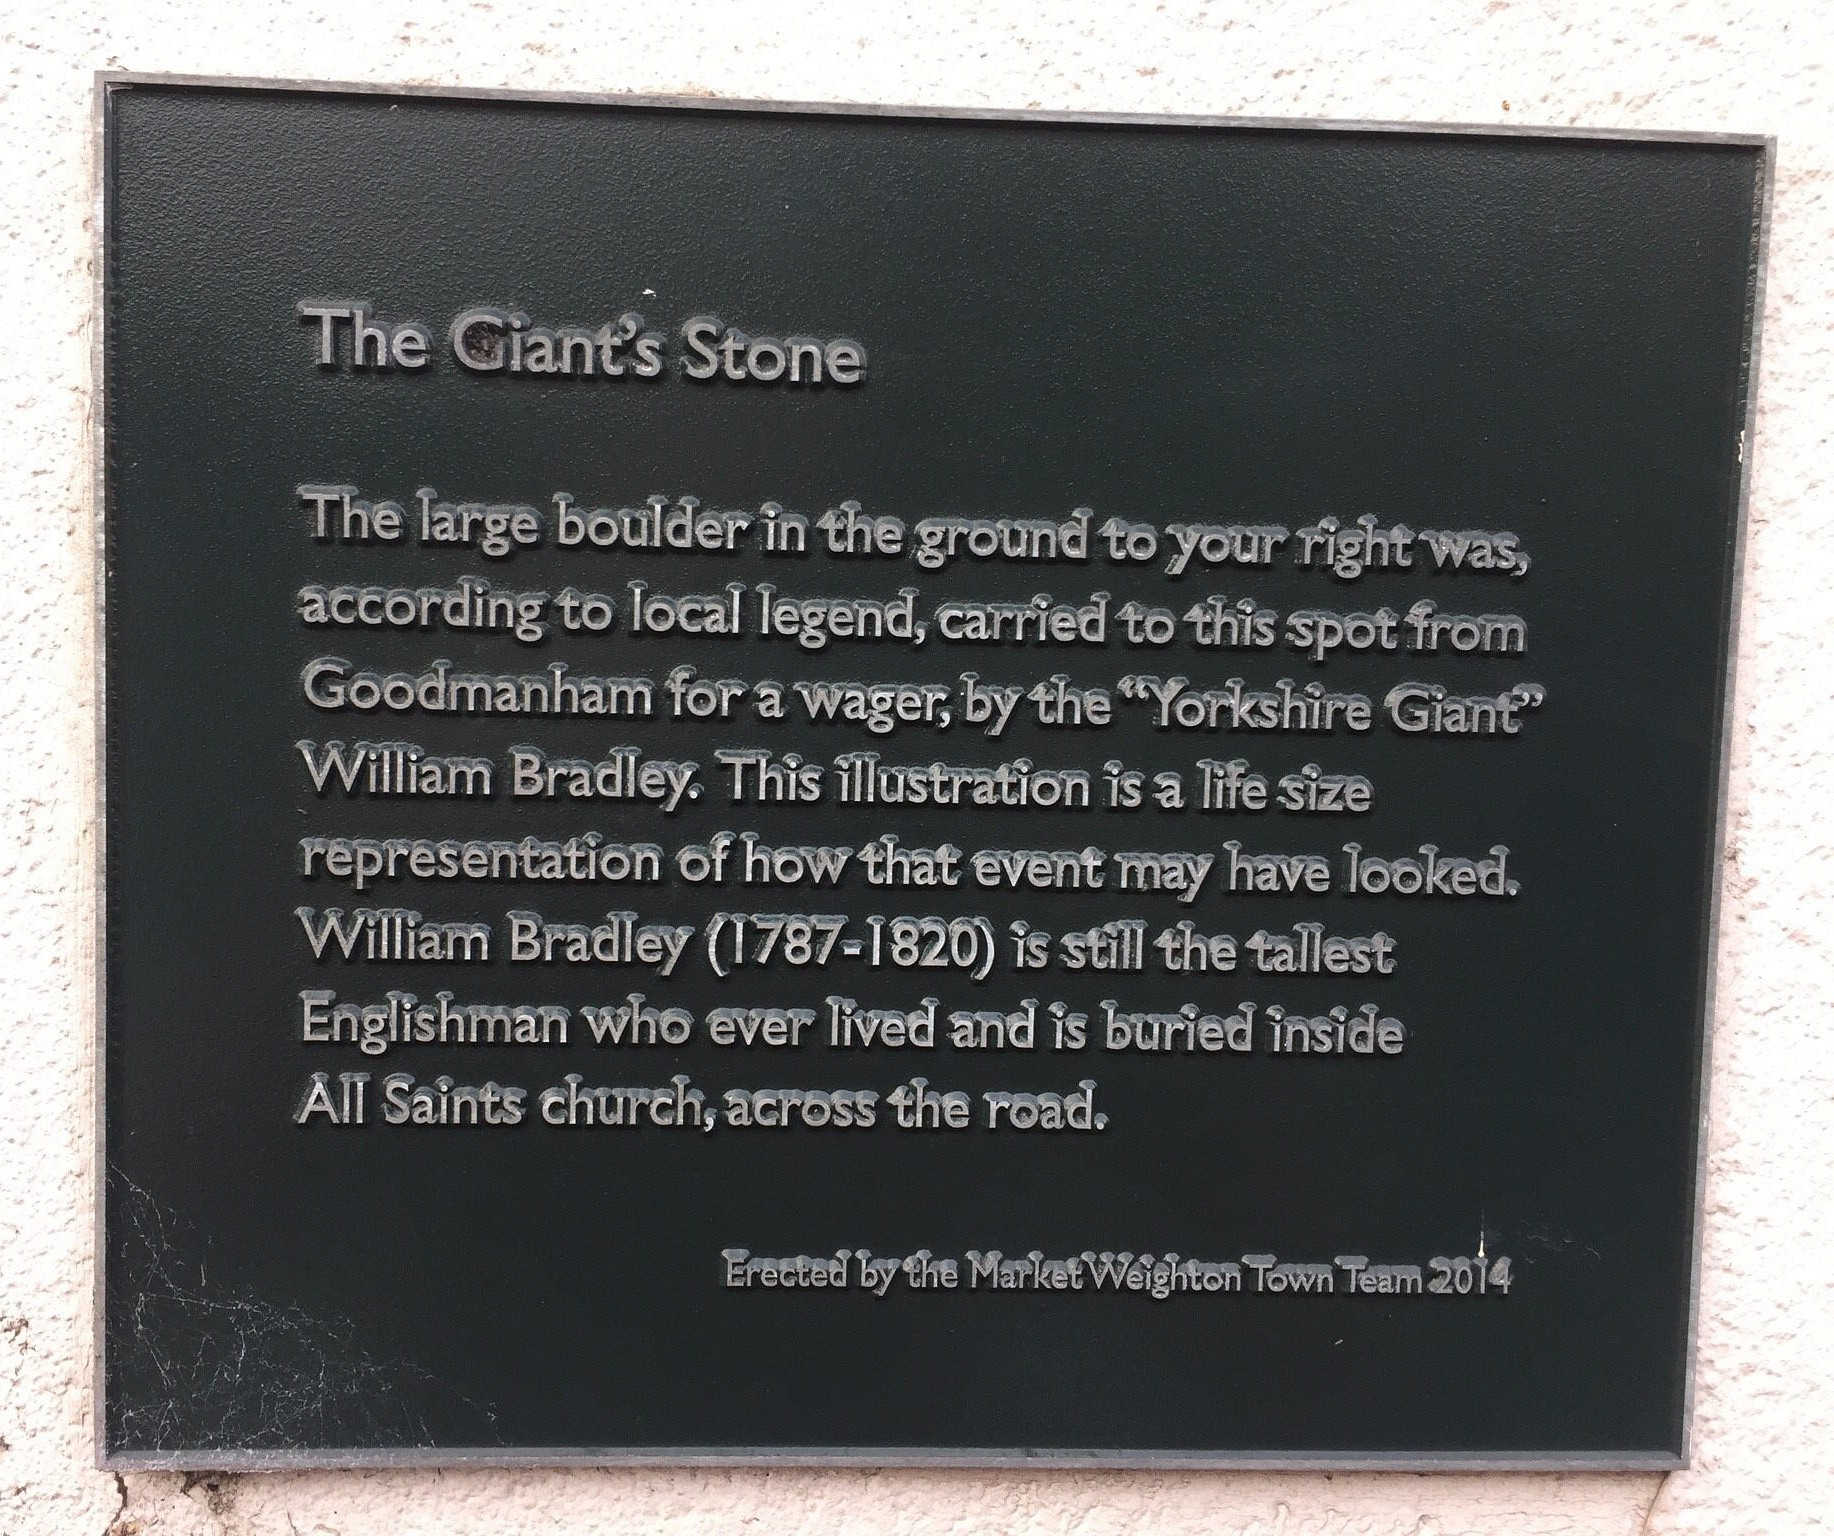 The plaque next to the Giant's Stone